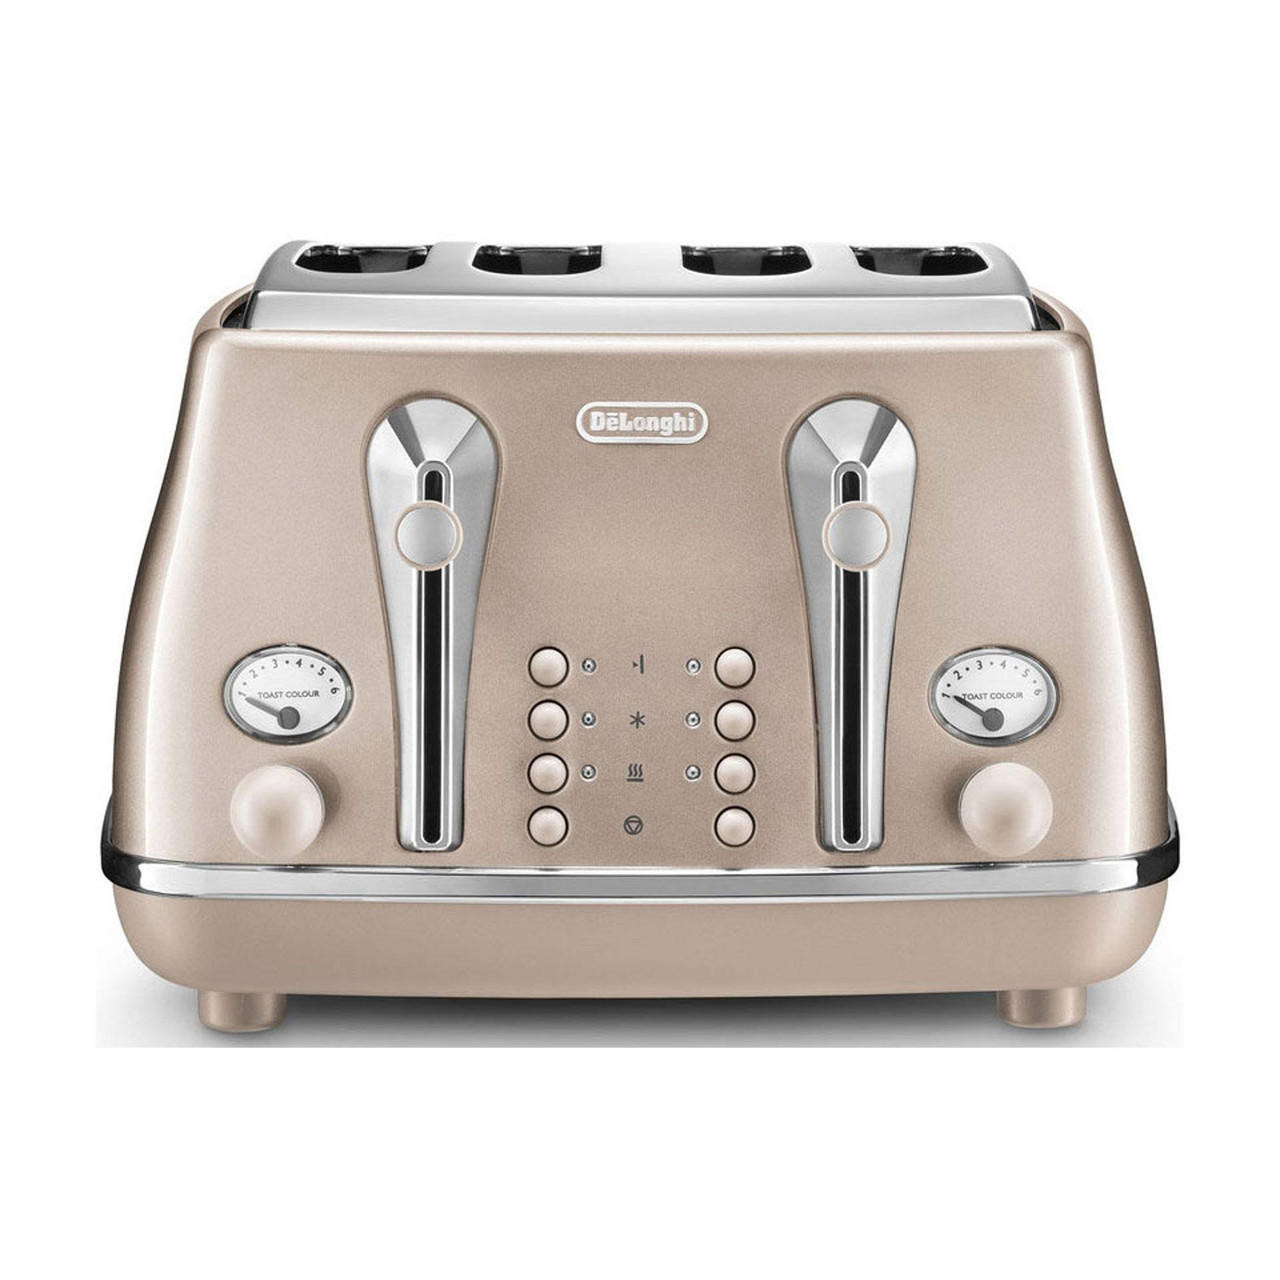 DELONGHI Icona Vintage toaster grille-pain 2 tranches 4 fonctions 900w beige/inox